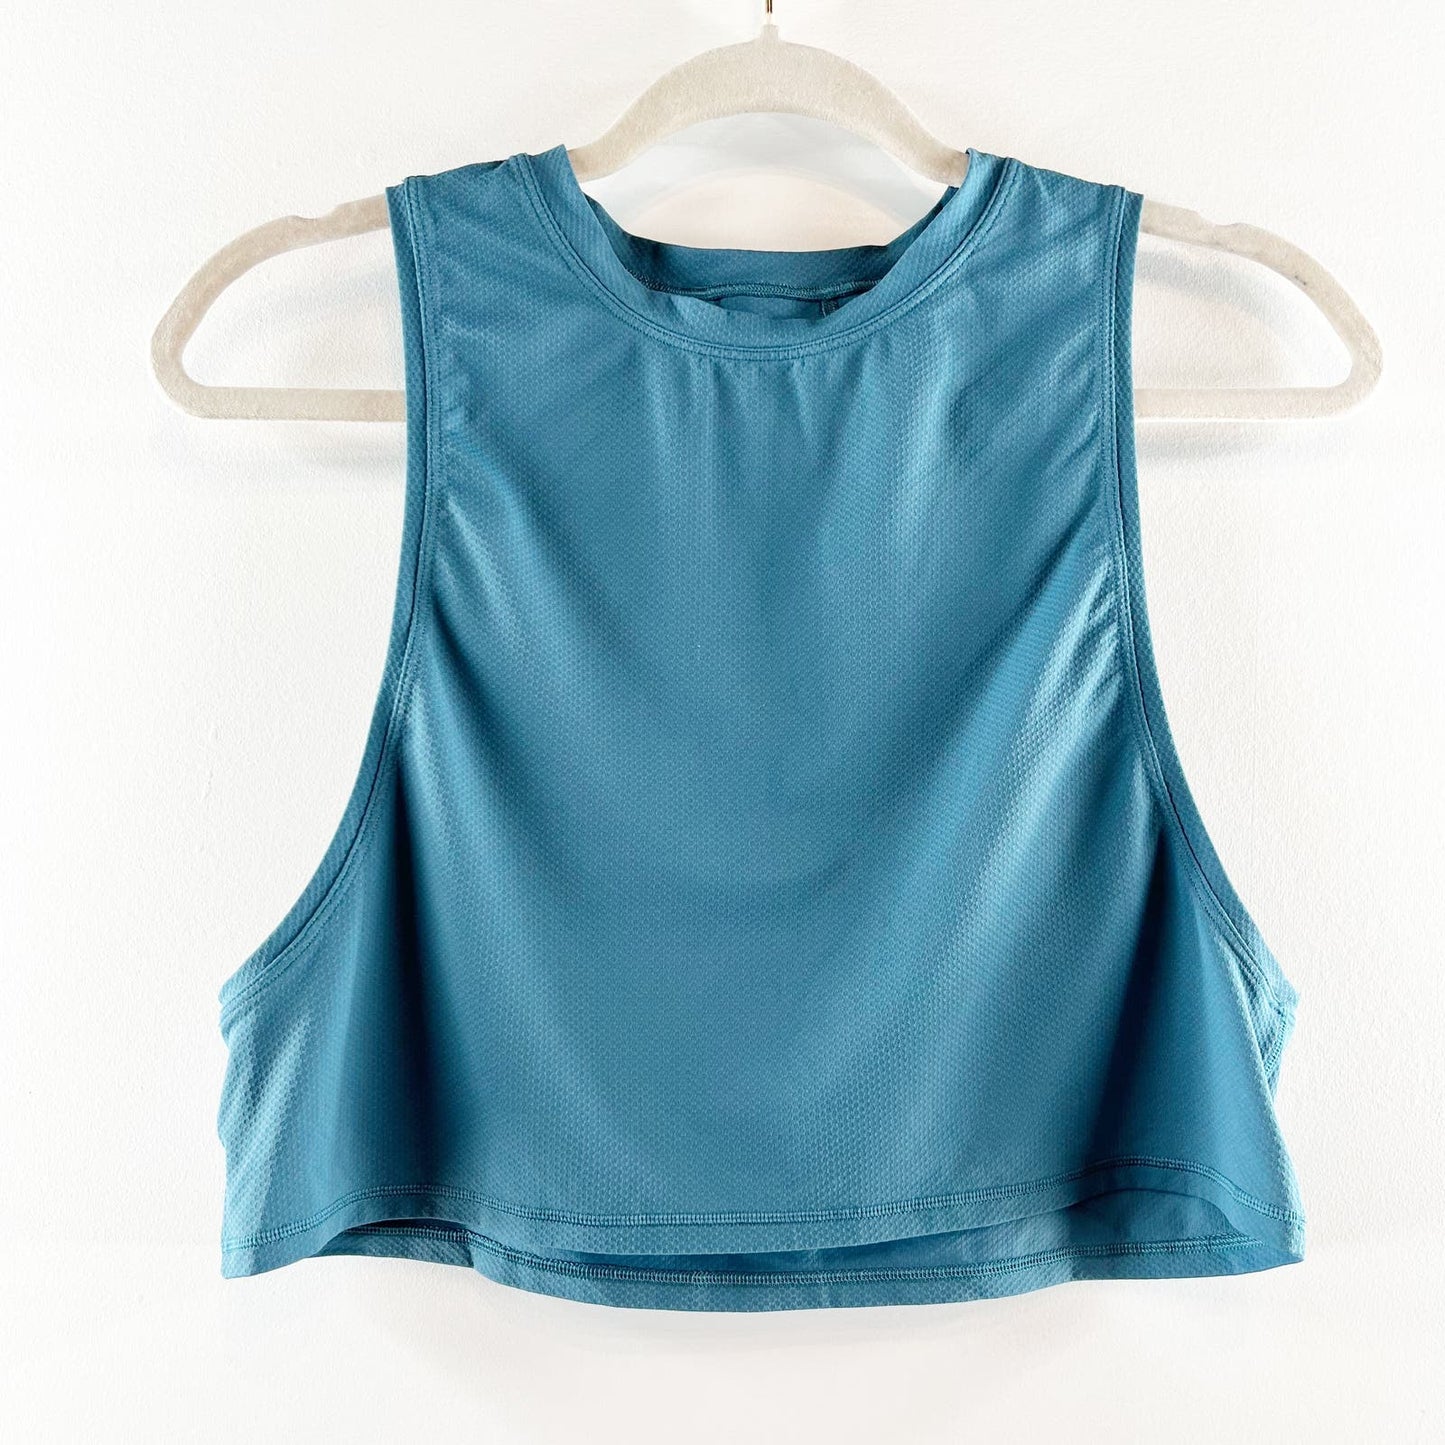 Lululemon Sleeeveless Cropped Workout Tank Top Teal Blue Green Small